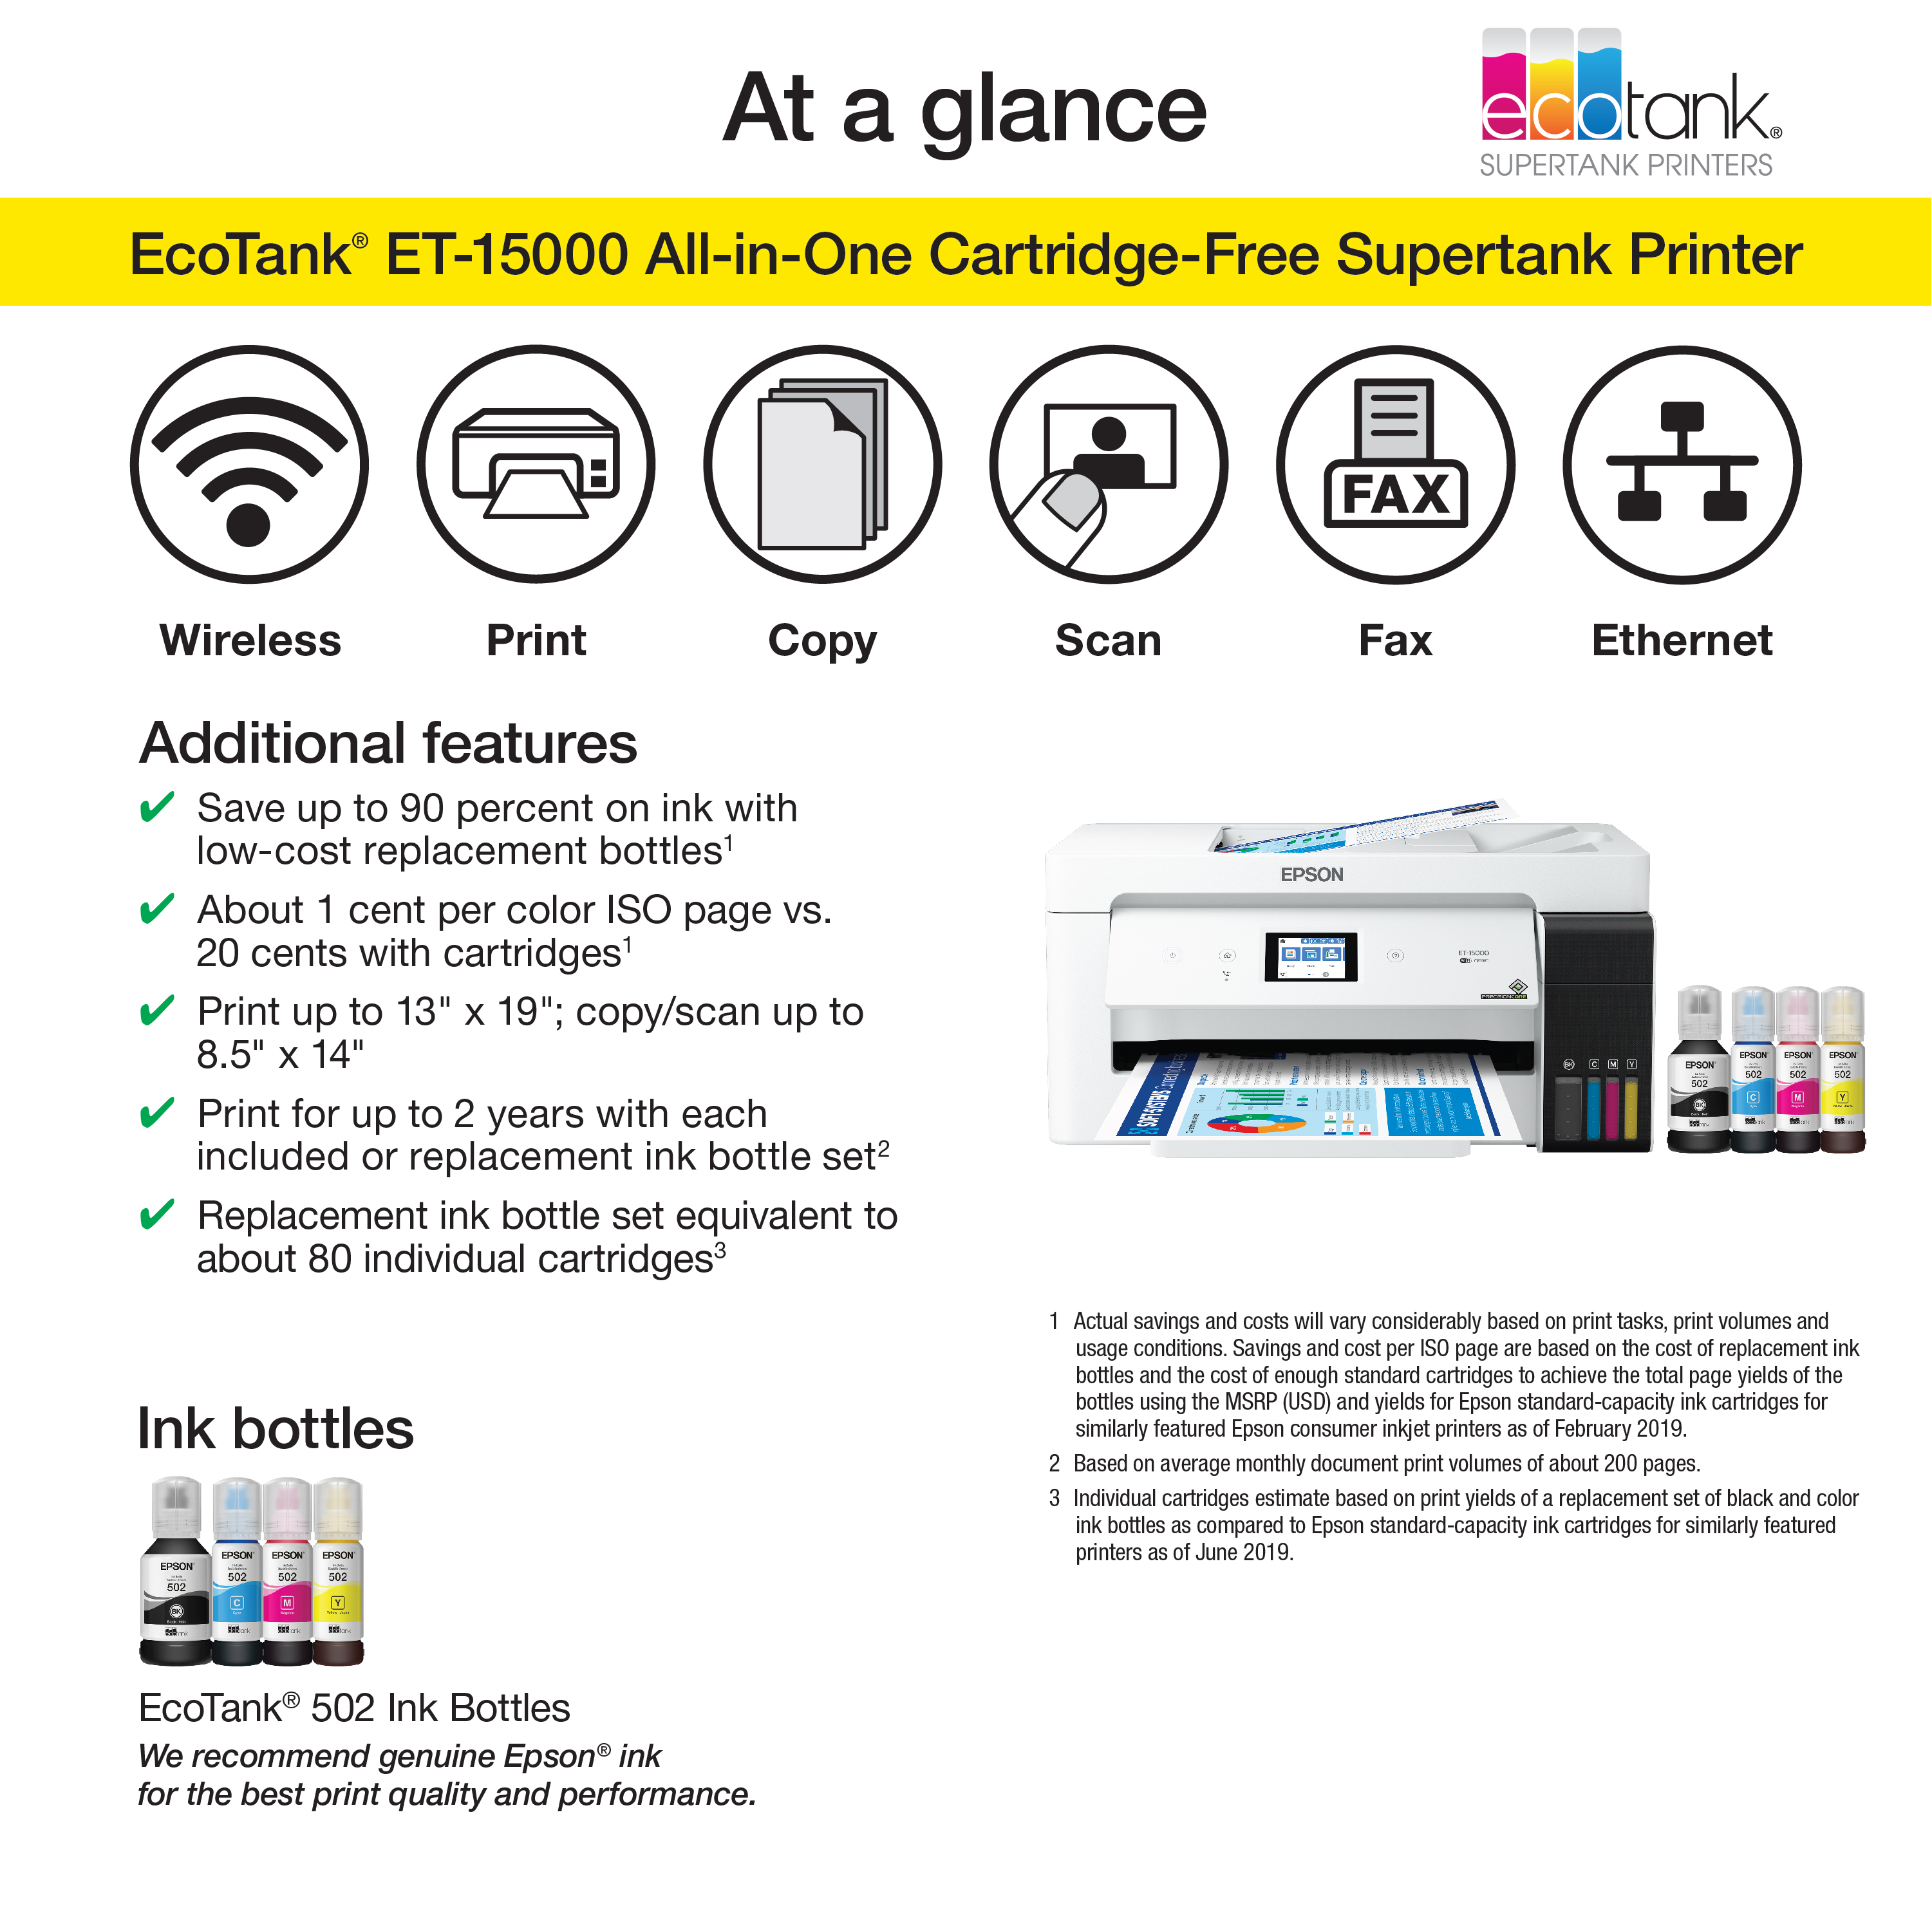 Epson EcoTank ET-15000 Wireless Color All-in-One Supertank Printer with Scanner, Copier, Fax, Ethernet and Printing up to 13 x 19 Inches - image 3 of 6